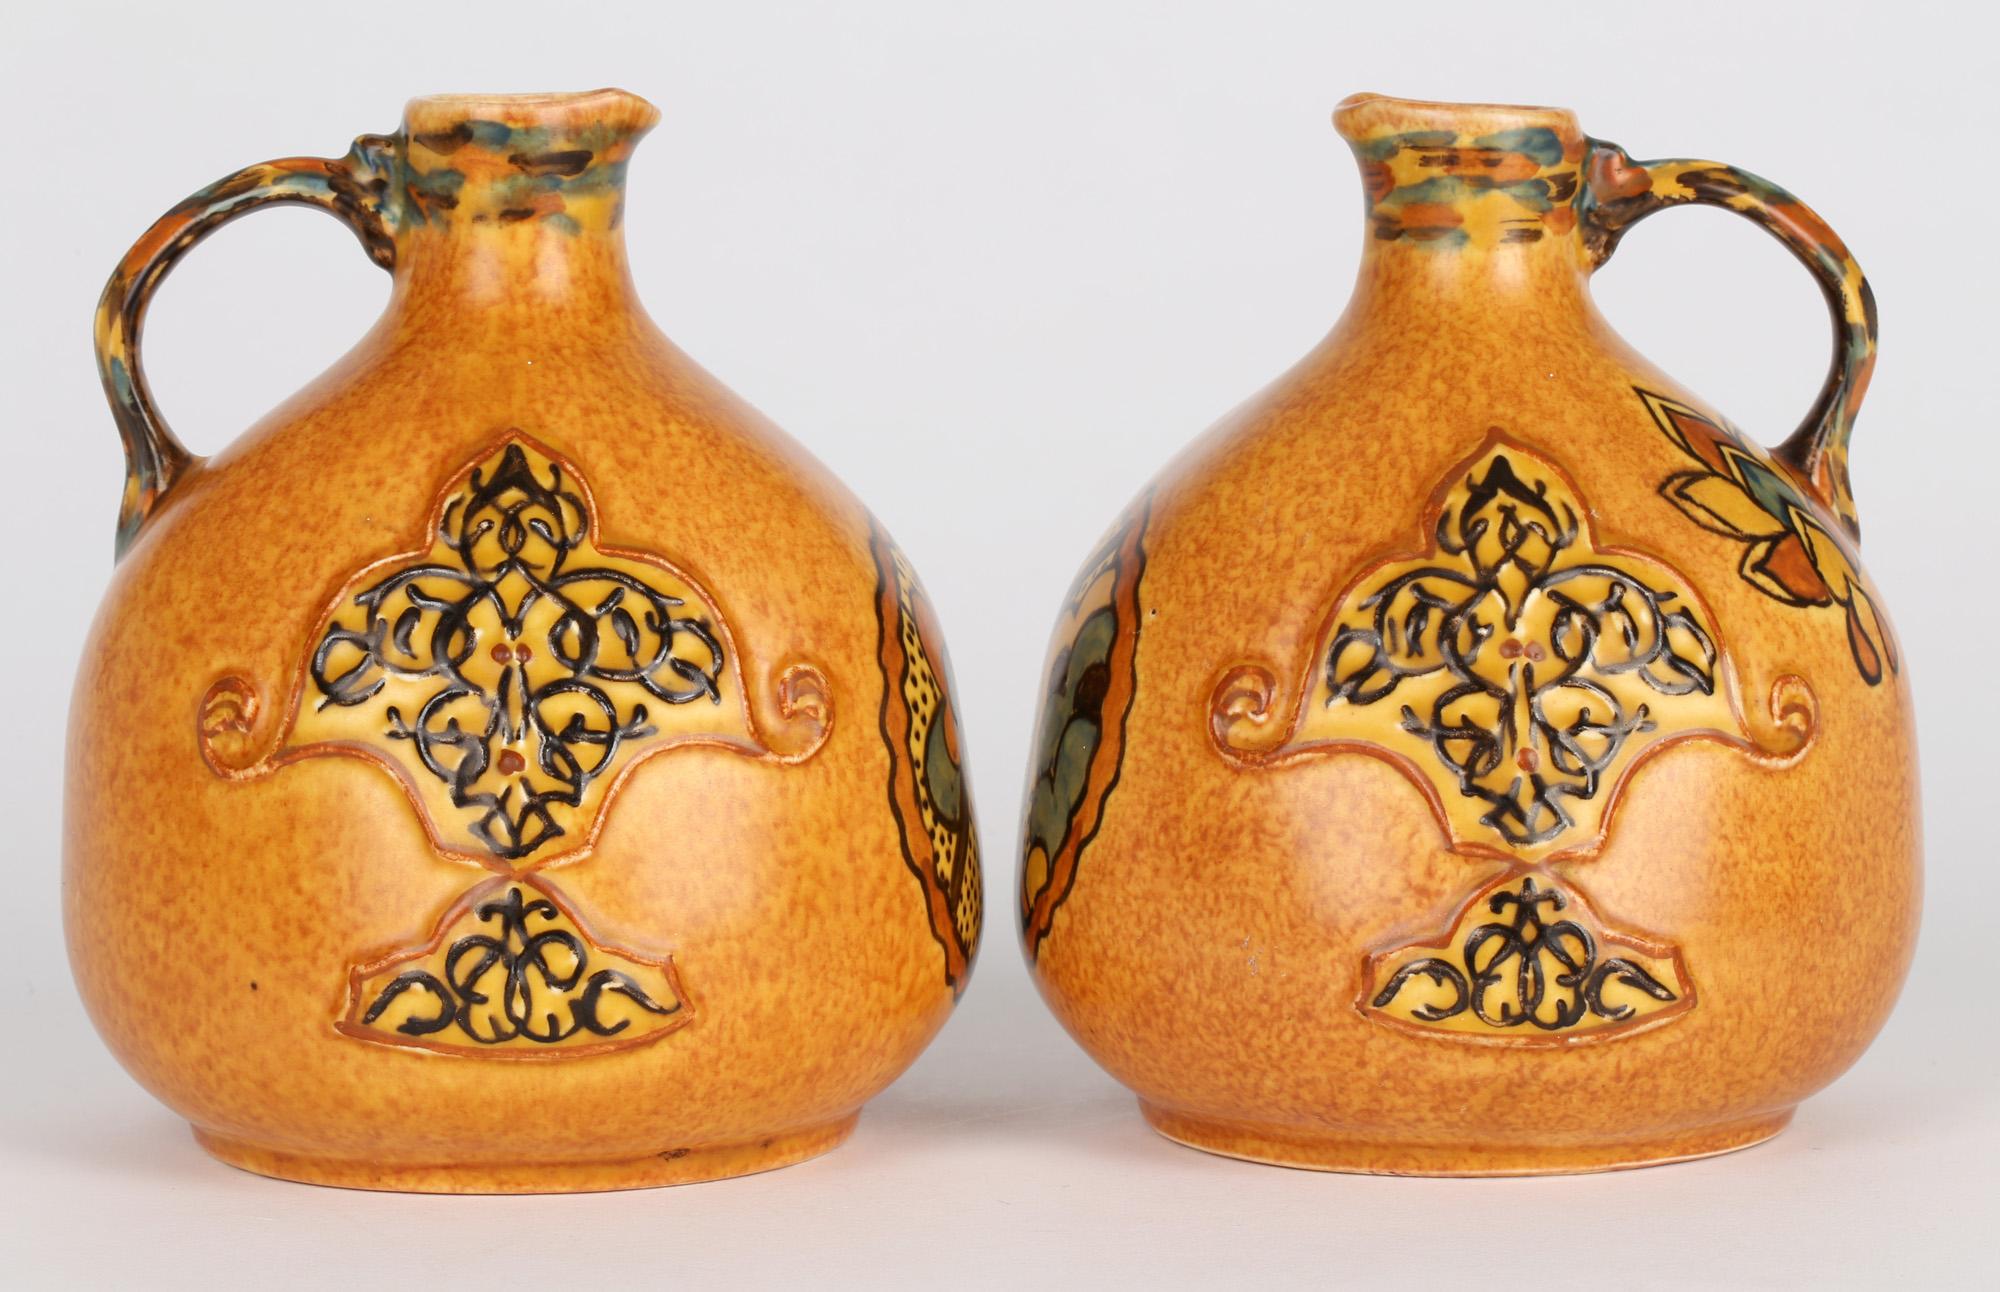 A very stylish pair Art Deco George Clews & Co, Tunstall, Chameleon Ware reproduction of Persian Art handled pottery jugs dating from around 1930. The jugs stand on a rounded base and have a slightly compressed rounded shape body with a narrow short